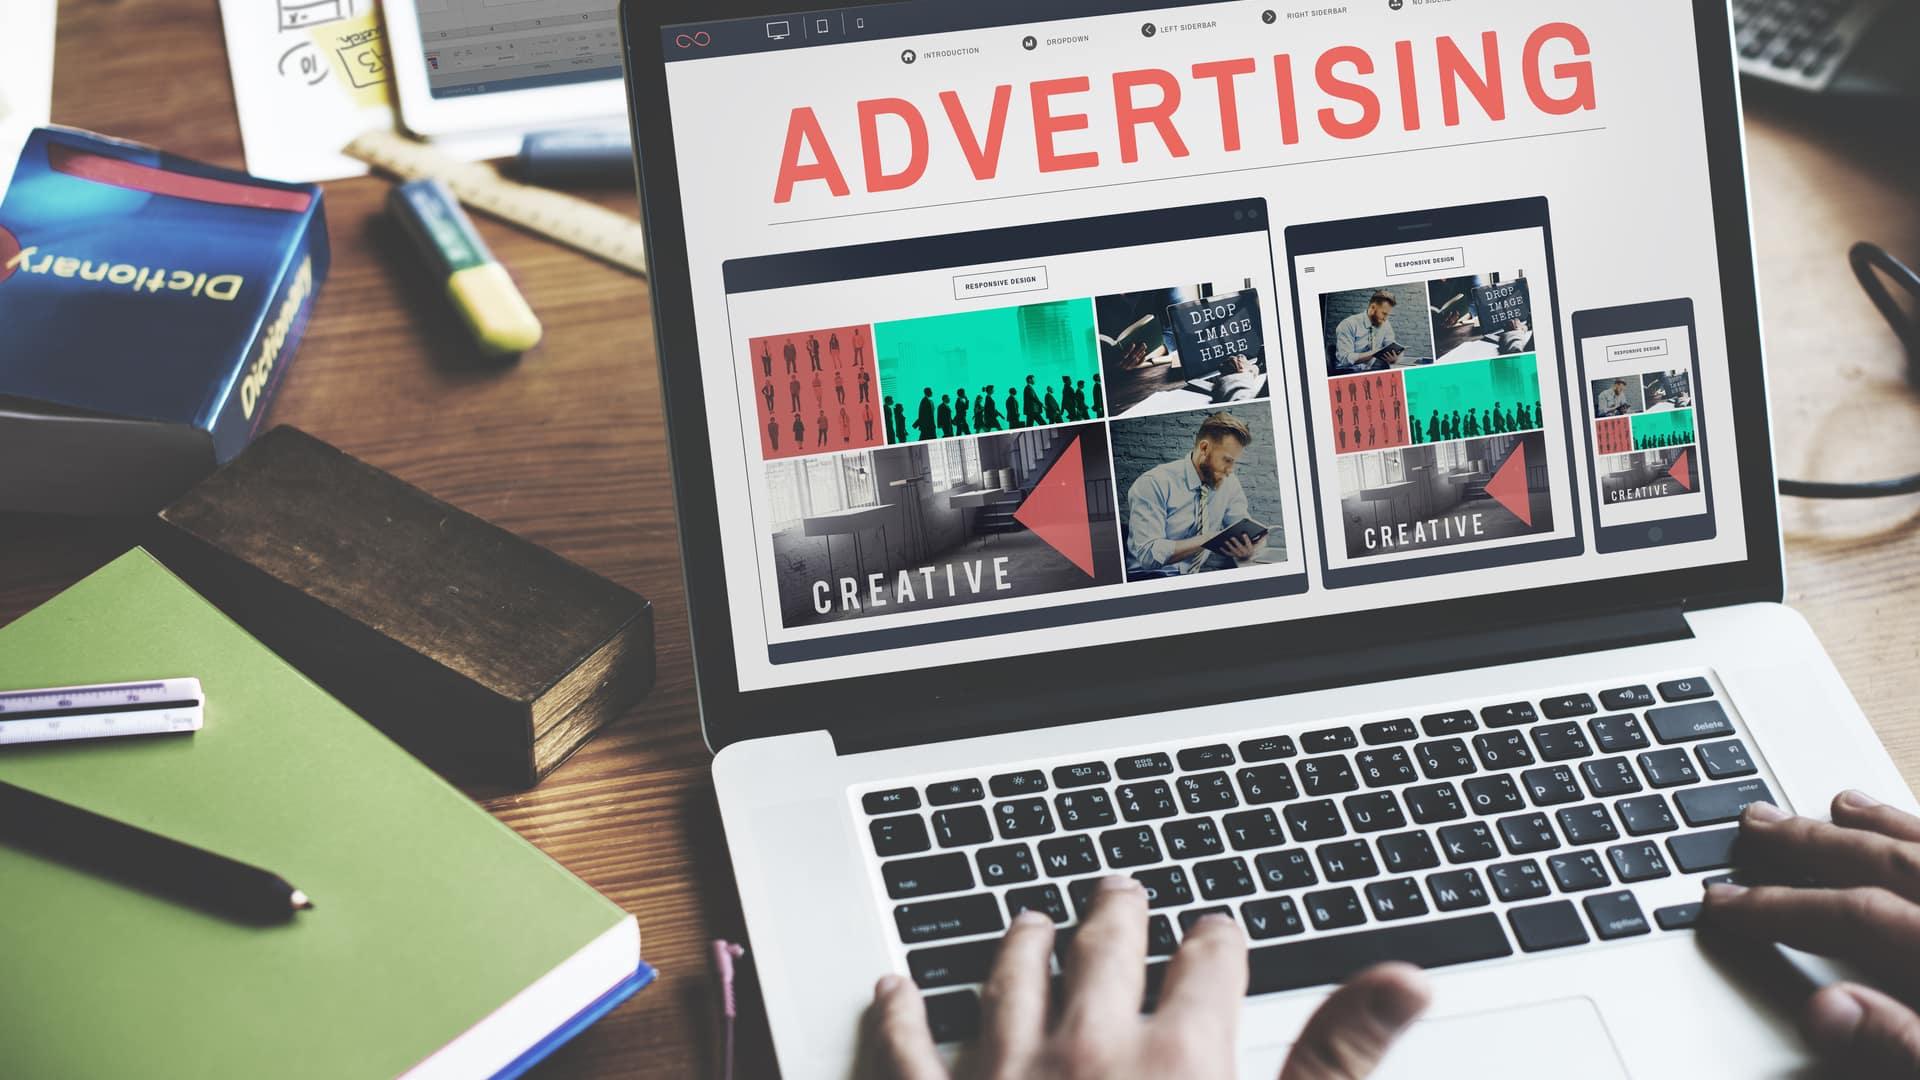 GumGum introduces a personal data-free approach to digital advertising